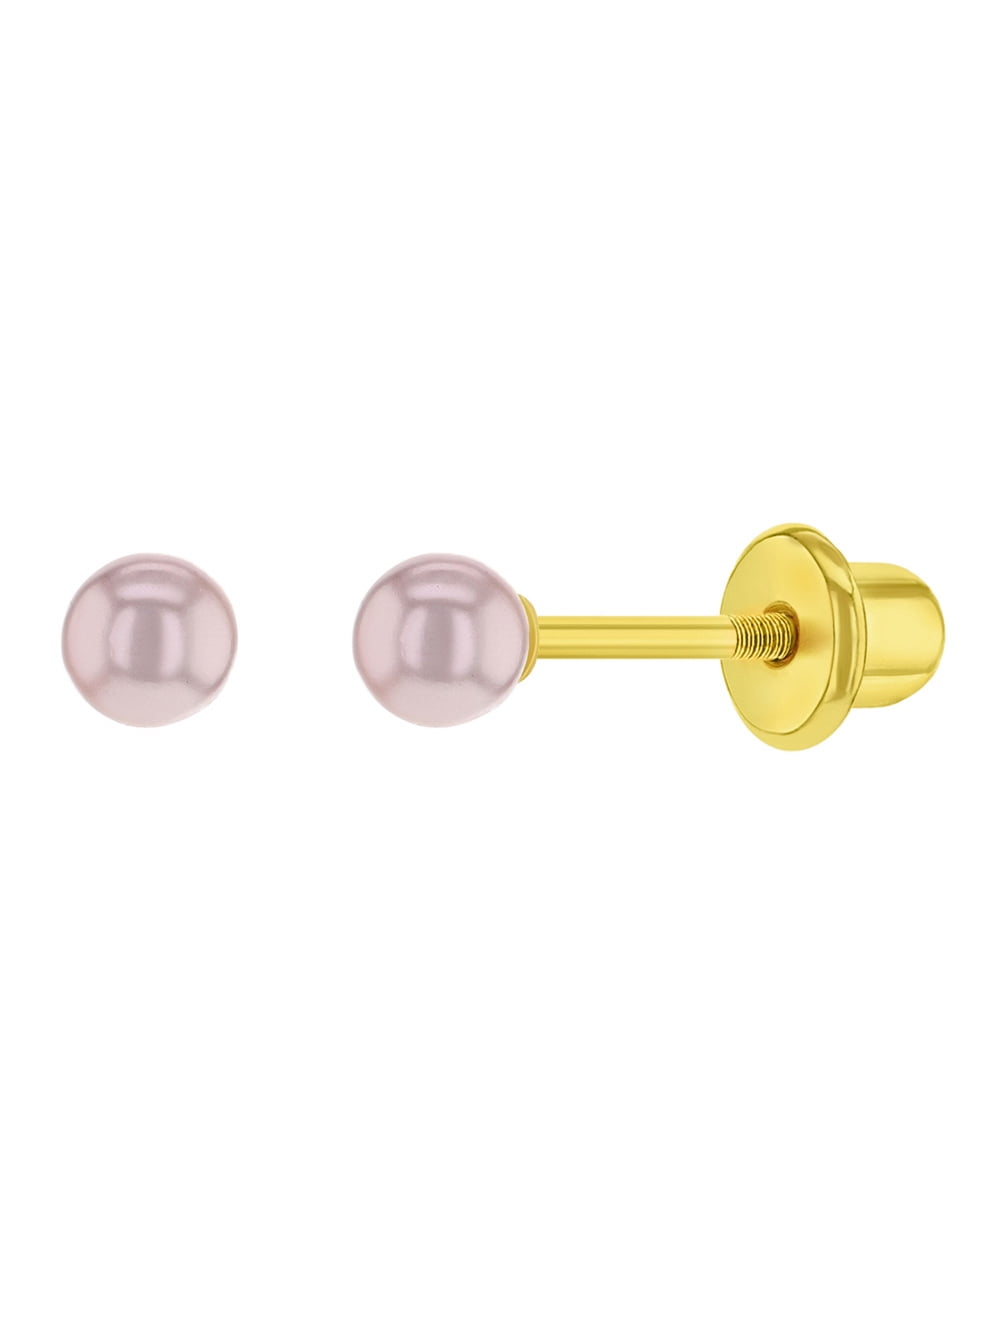 Gold Plated Rose Pink Simulated Pearl Safety Screw Back Earrings for Babies  3mm